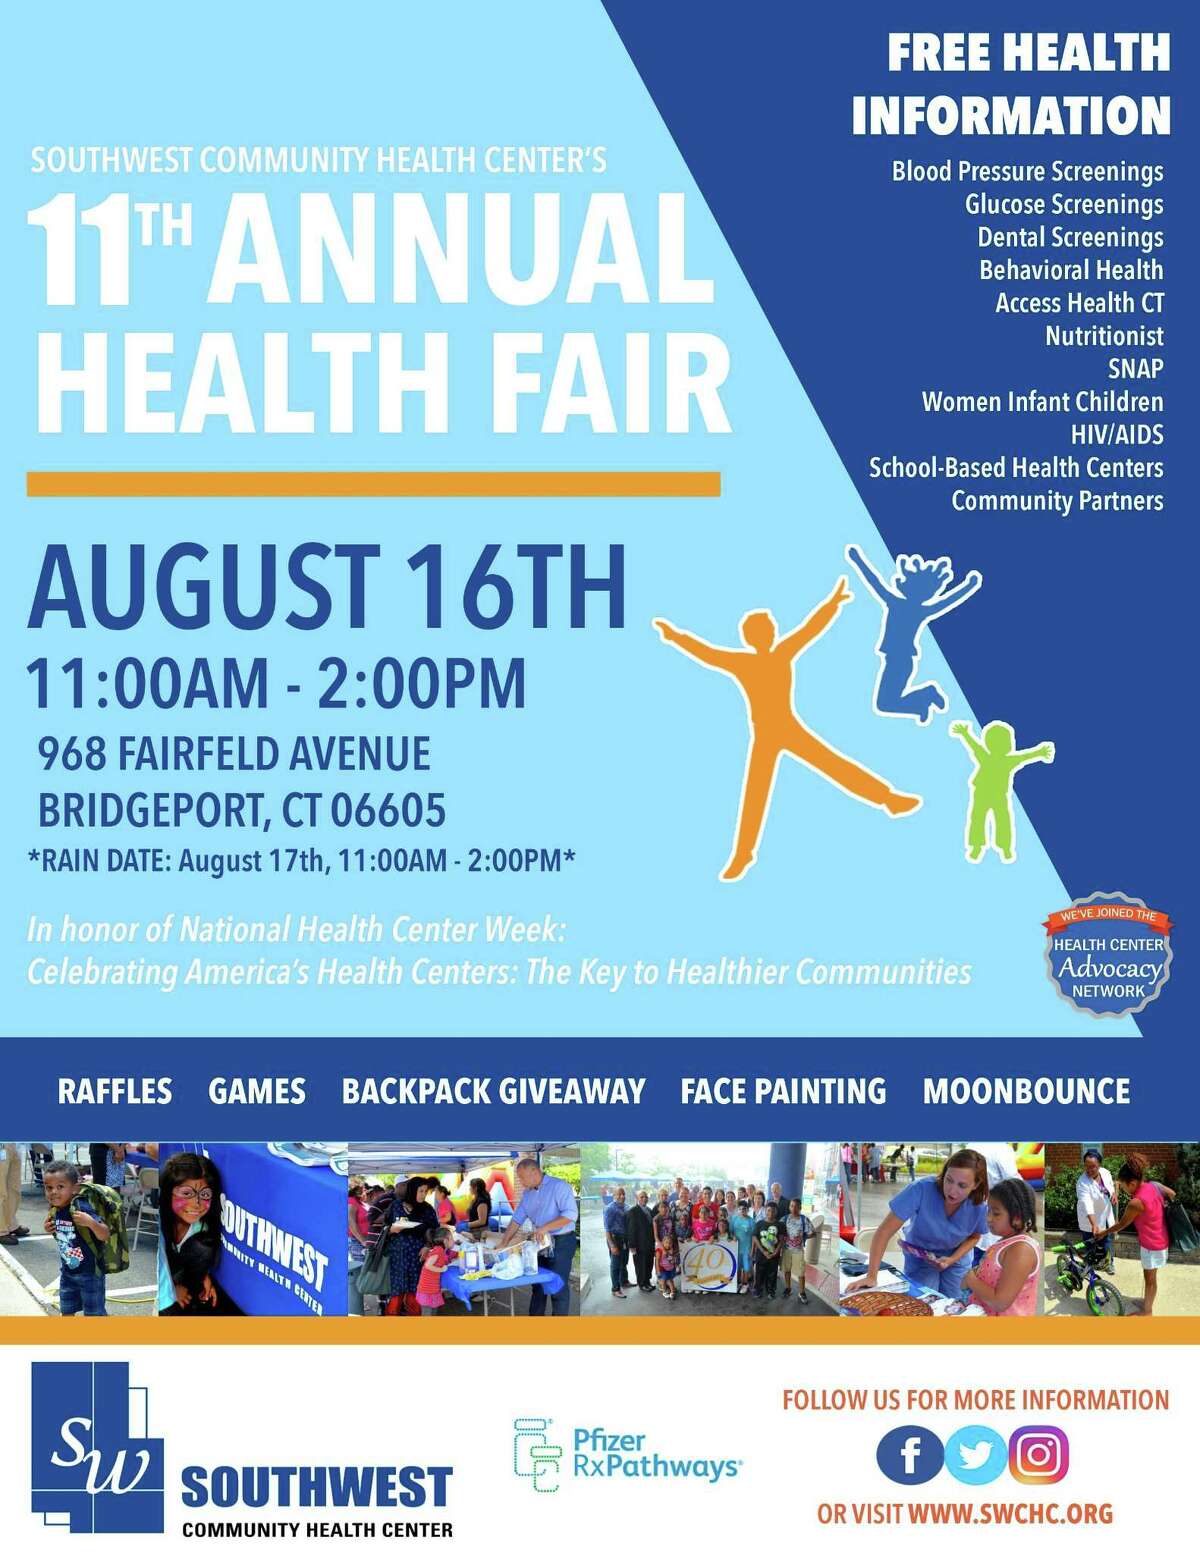 In celebration of National Health Center Week, which is this week, Southwest Community Health Center will host its 11th Annual Health Fair at 968 Fairfield Ave, Bridgeport, CT, 06605 from 11 a.m. to 2 p.m.Wednesday. Image courtesy of Southwest Community Health Center.